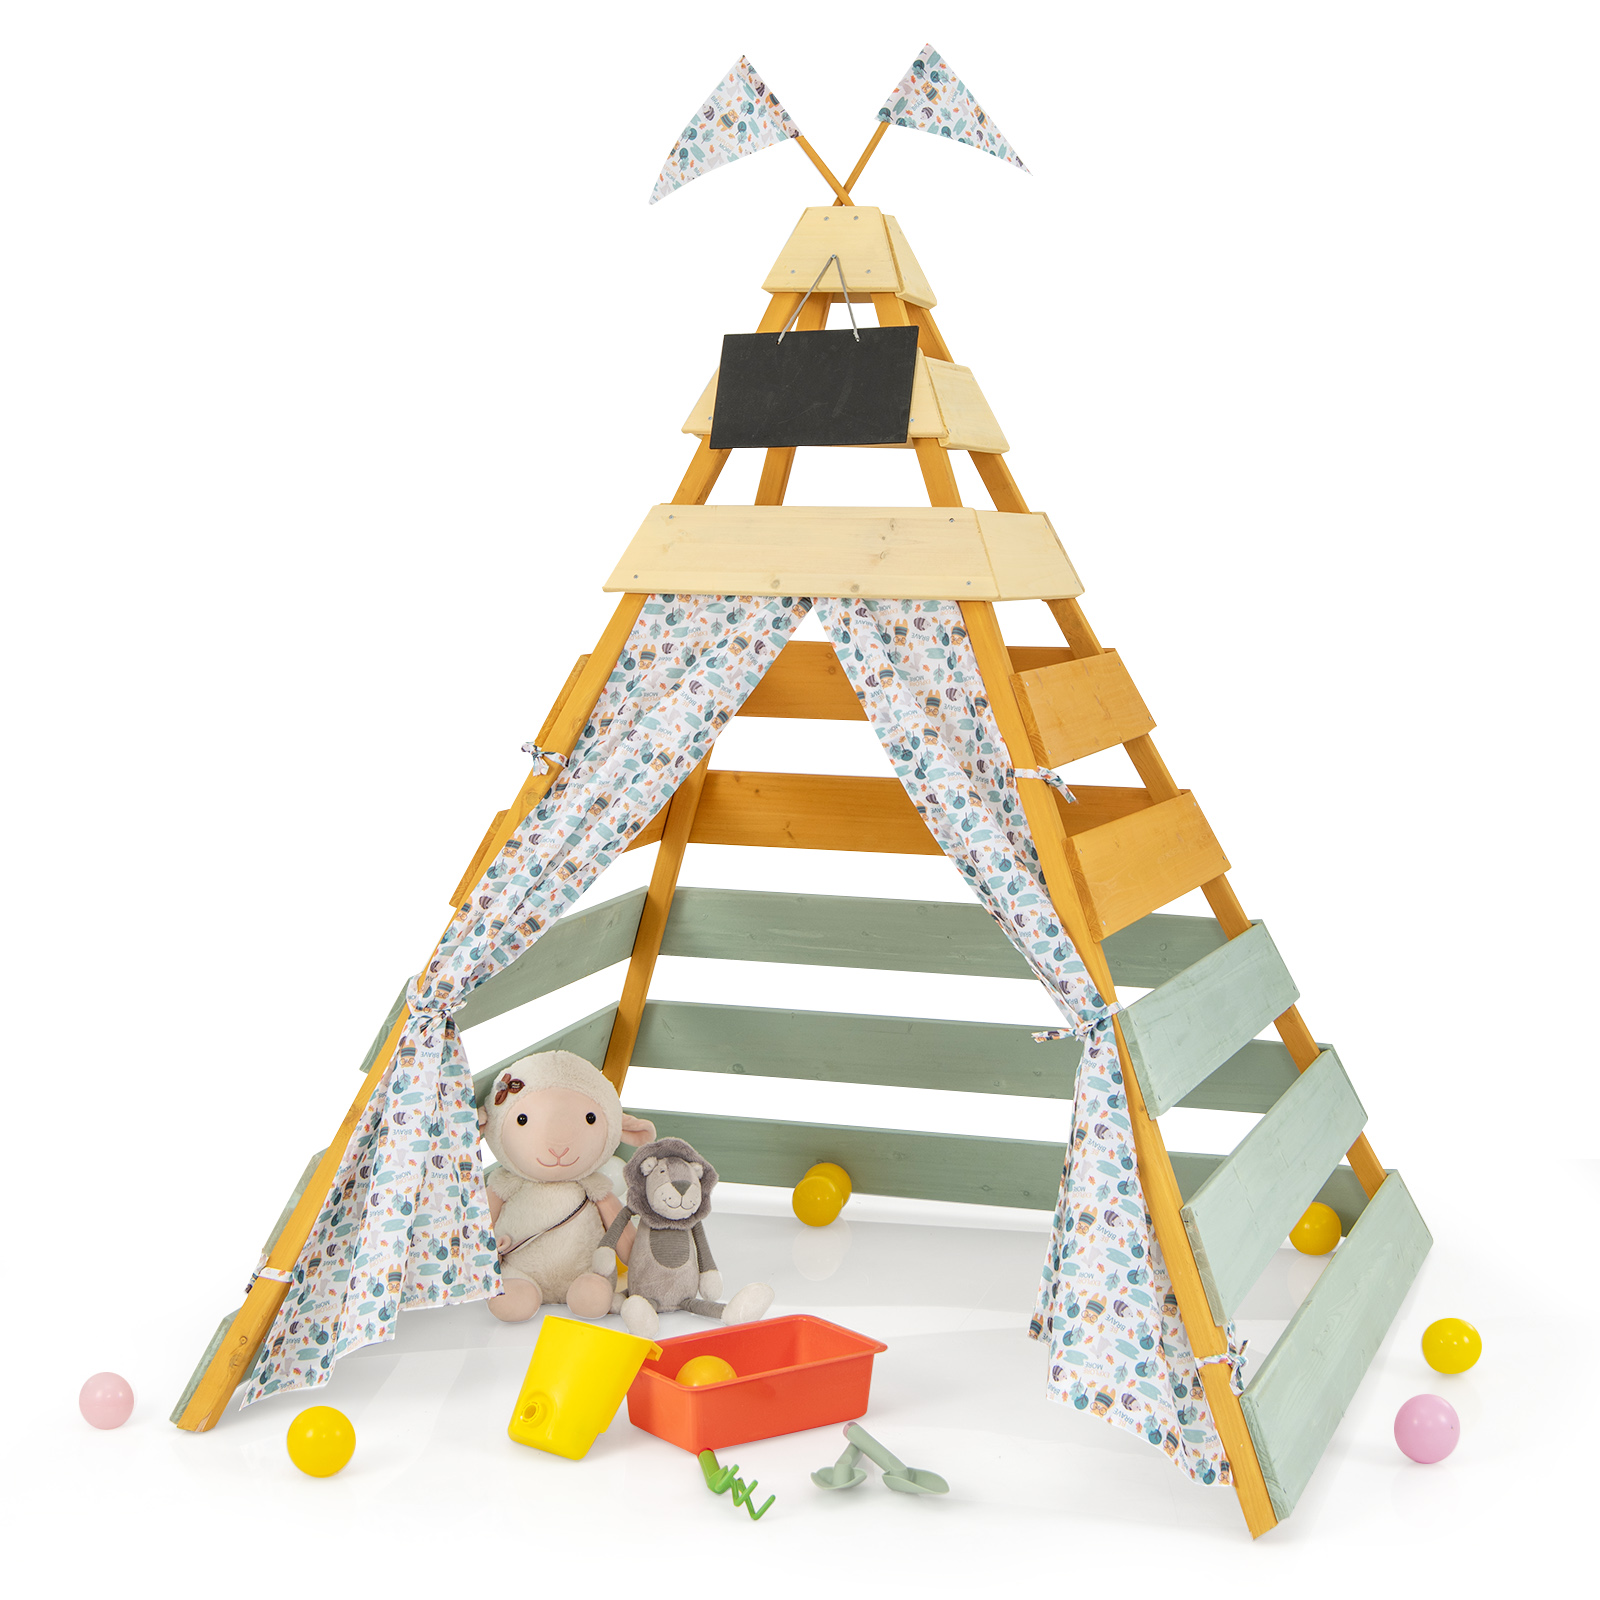 Wooden Play Tent Kids Teepee Tent with Door Curtains for Children 3-8 Years Old